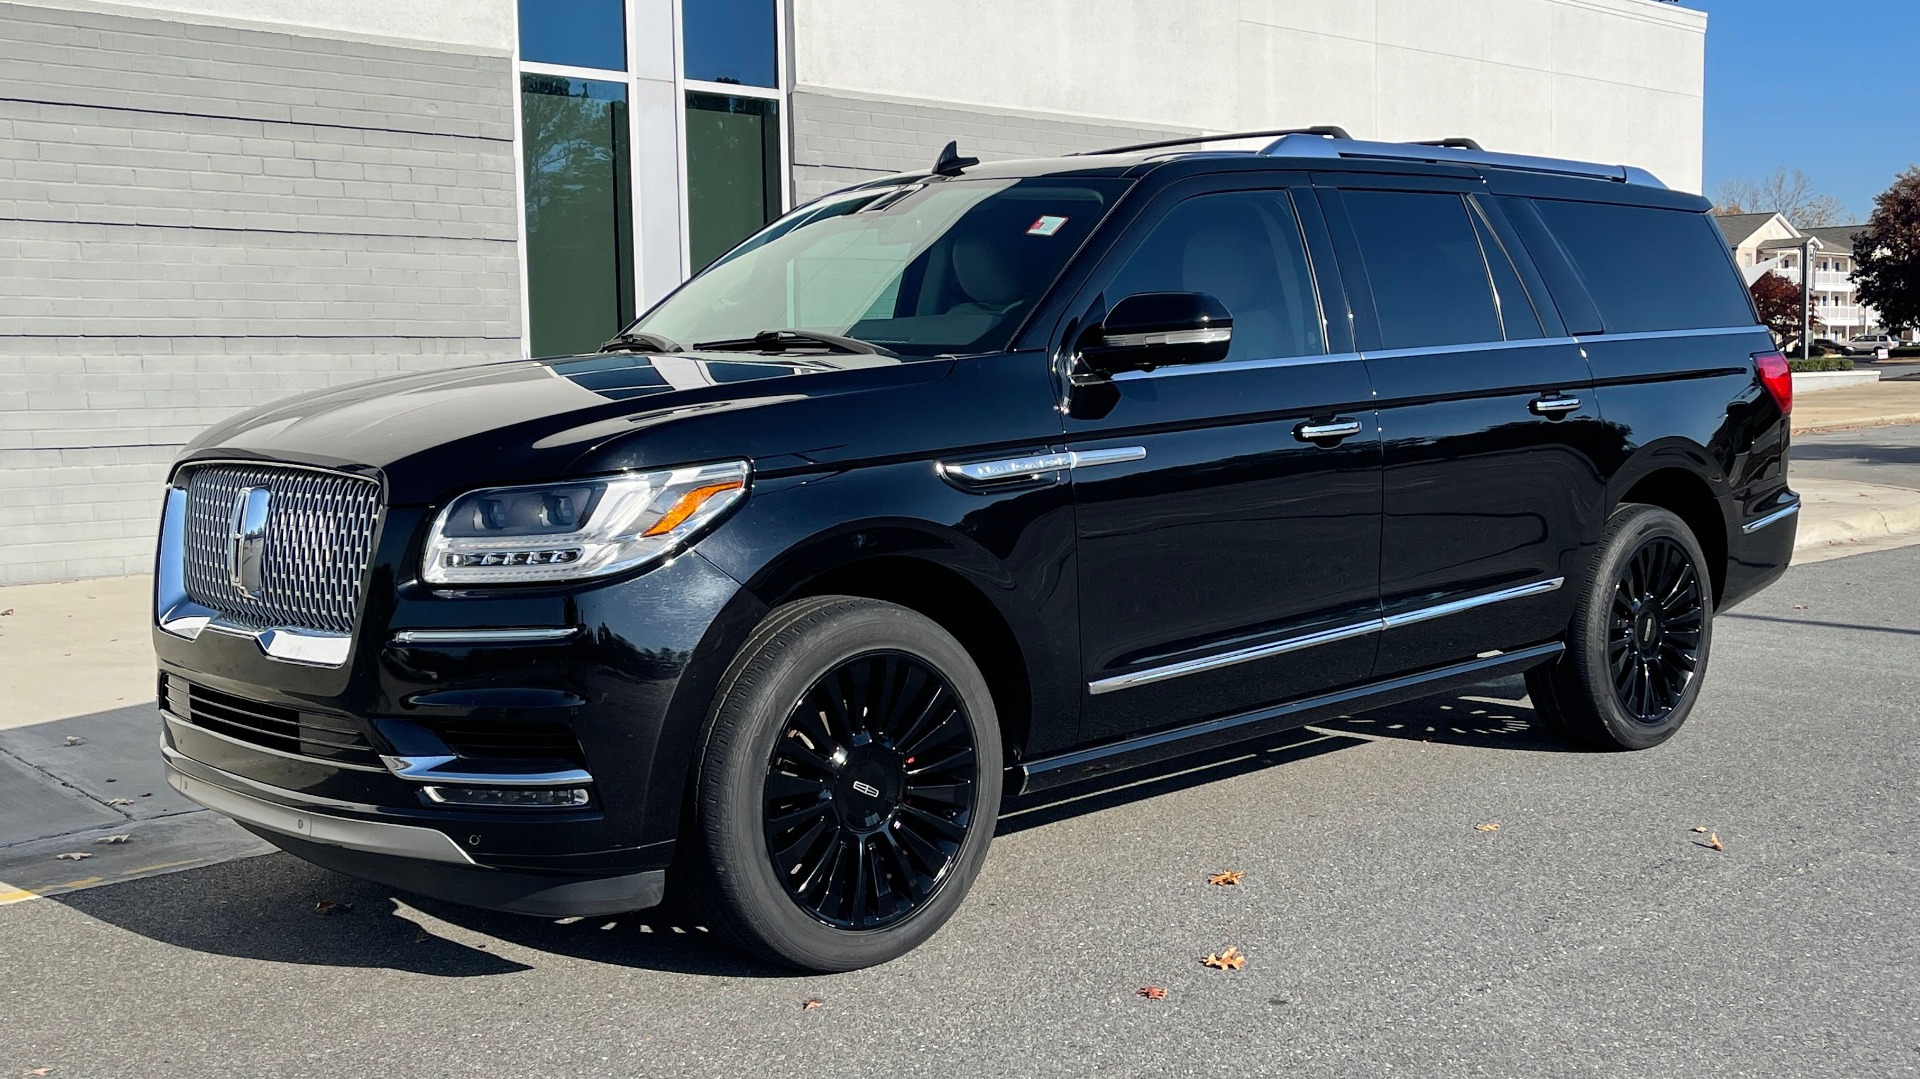 Used 2018 Lincoln NAVIGATOR L 4X4 SELECT / 3.5L V6 / 10-SPD AUTO / NAV / PANO-ROOF / 3-ROW / REARVIEW for sale Sold at Formula Imports in Charlotte NC 28227 4